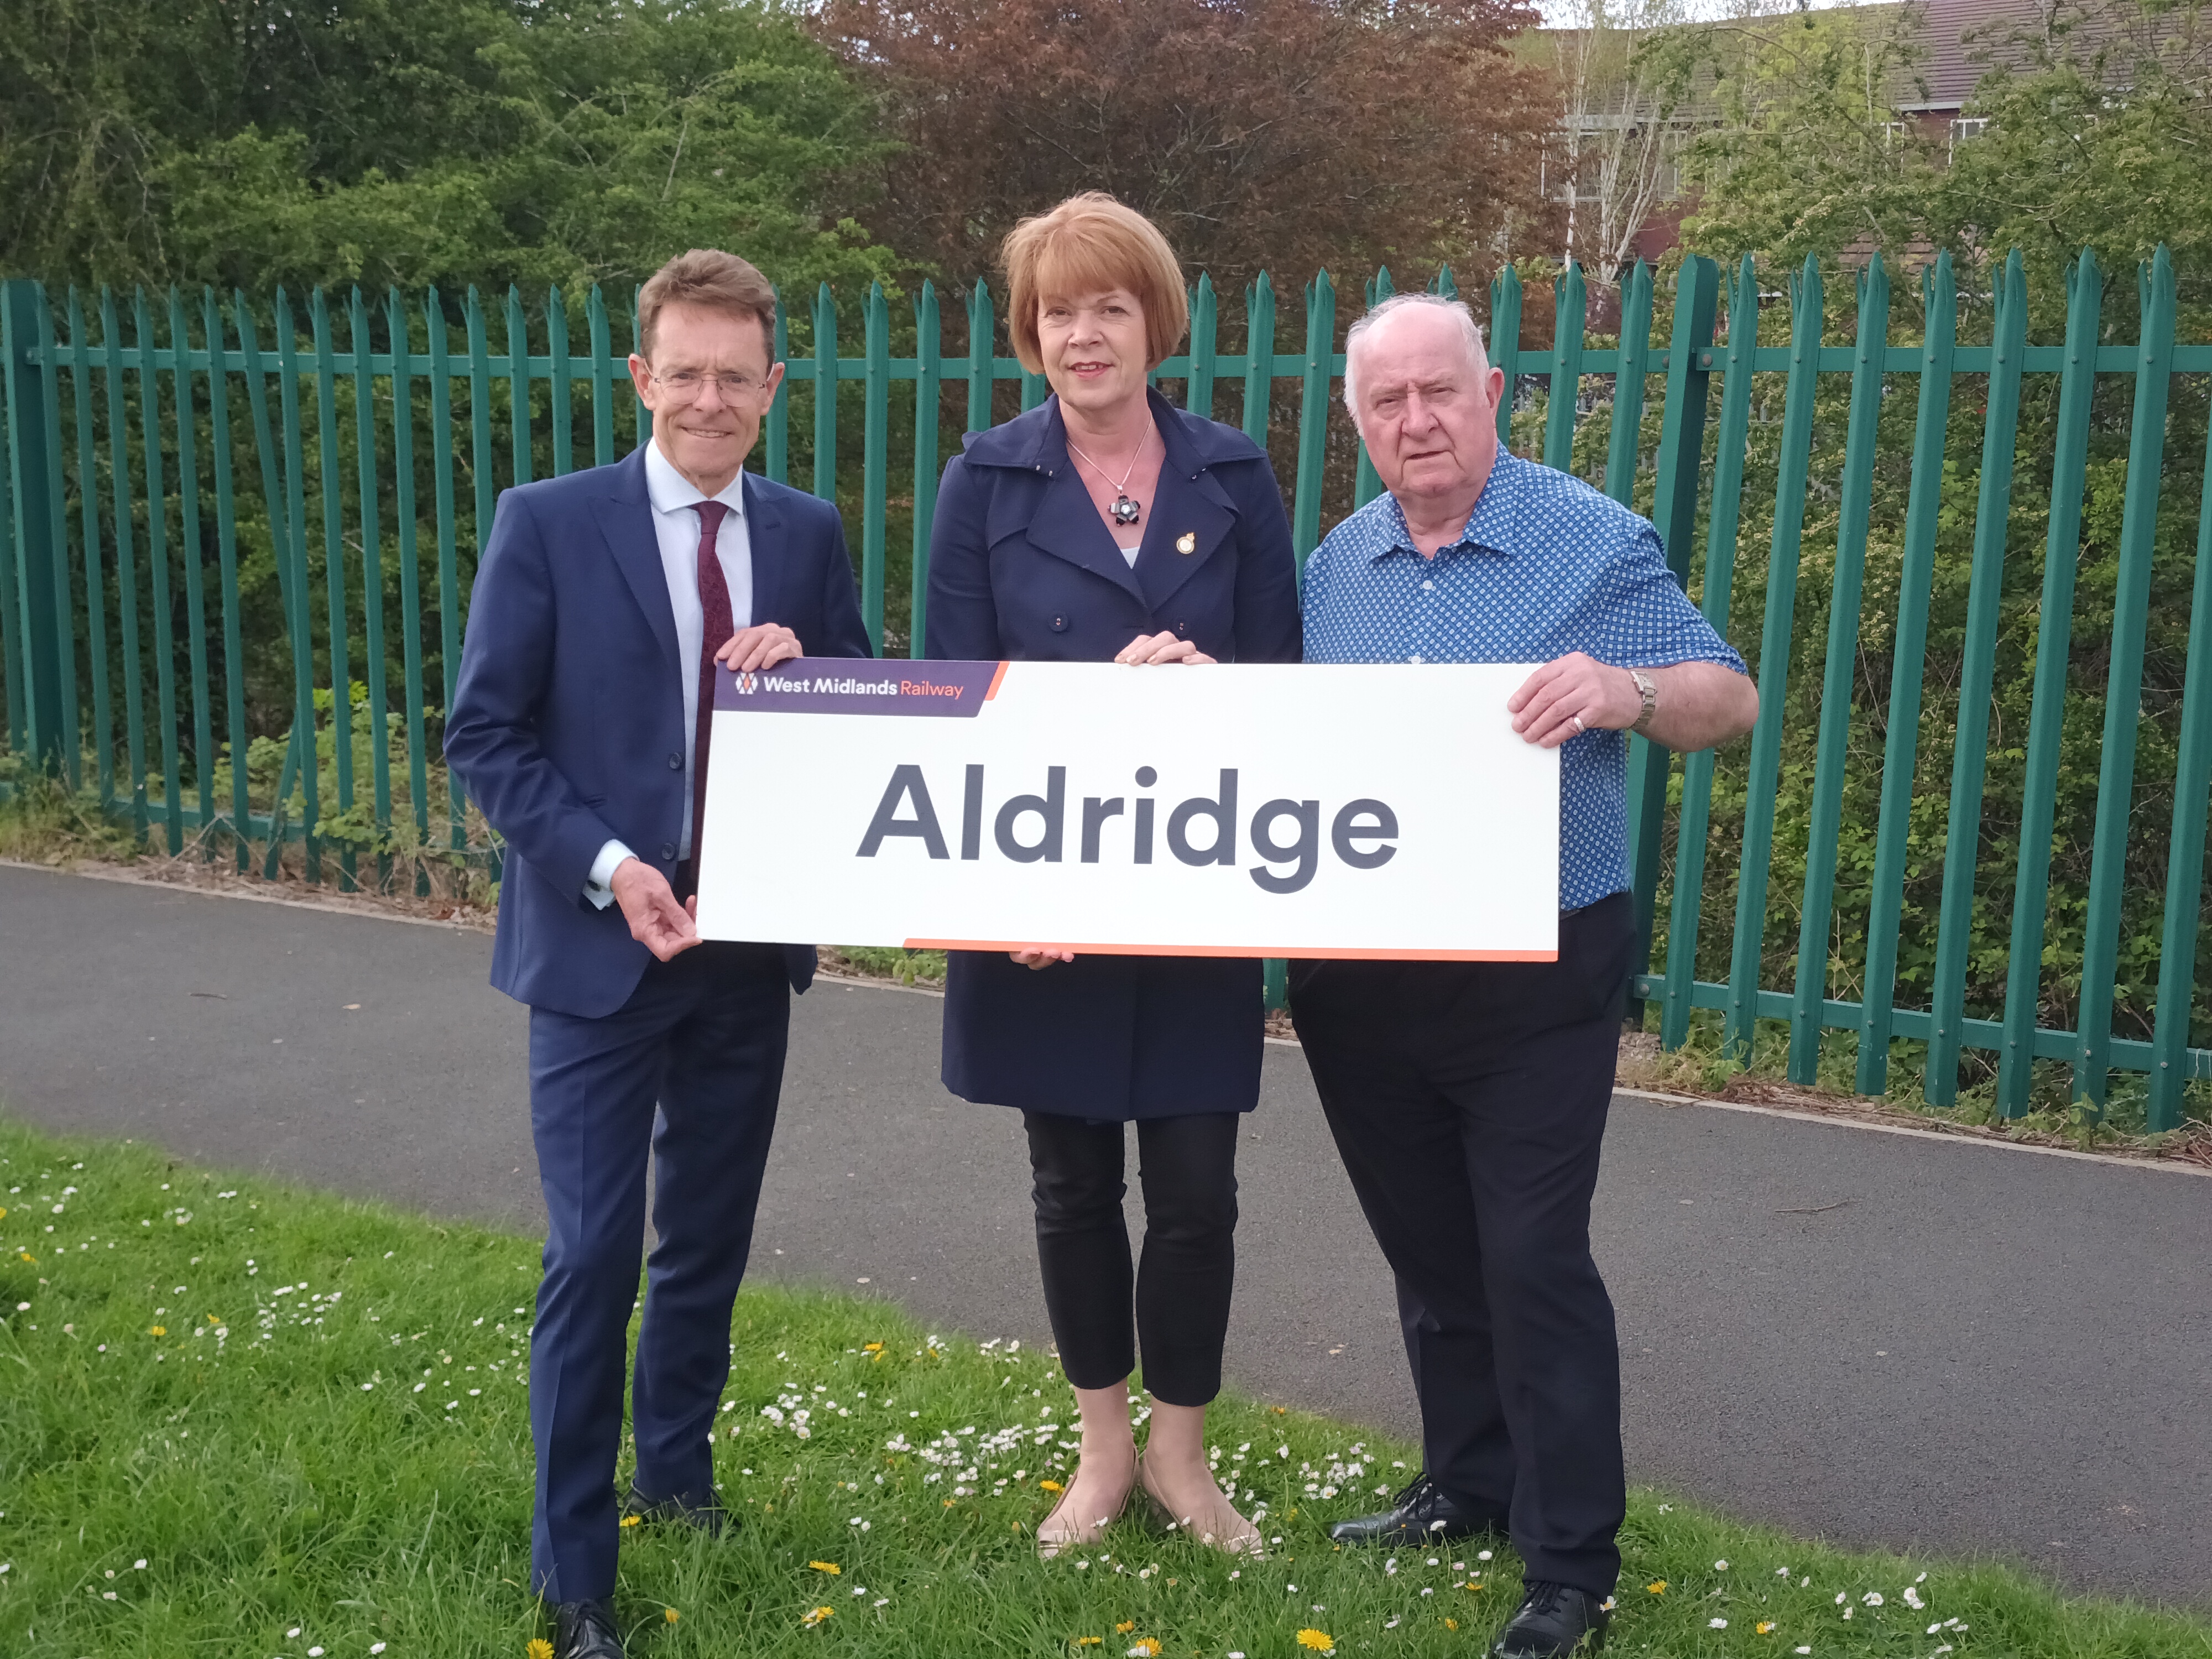 Andy Street, Wendy Morton and Cllr Mike Bird at the site for the new Aldridge raliway station